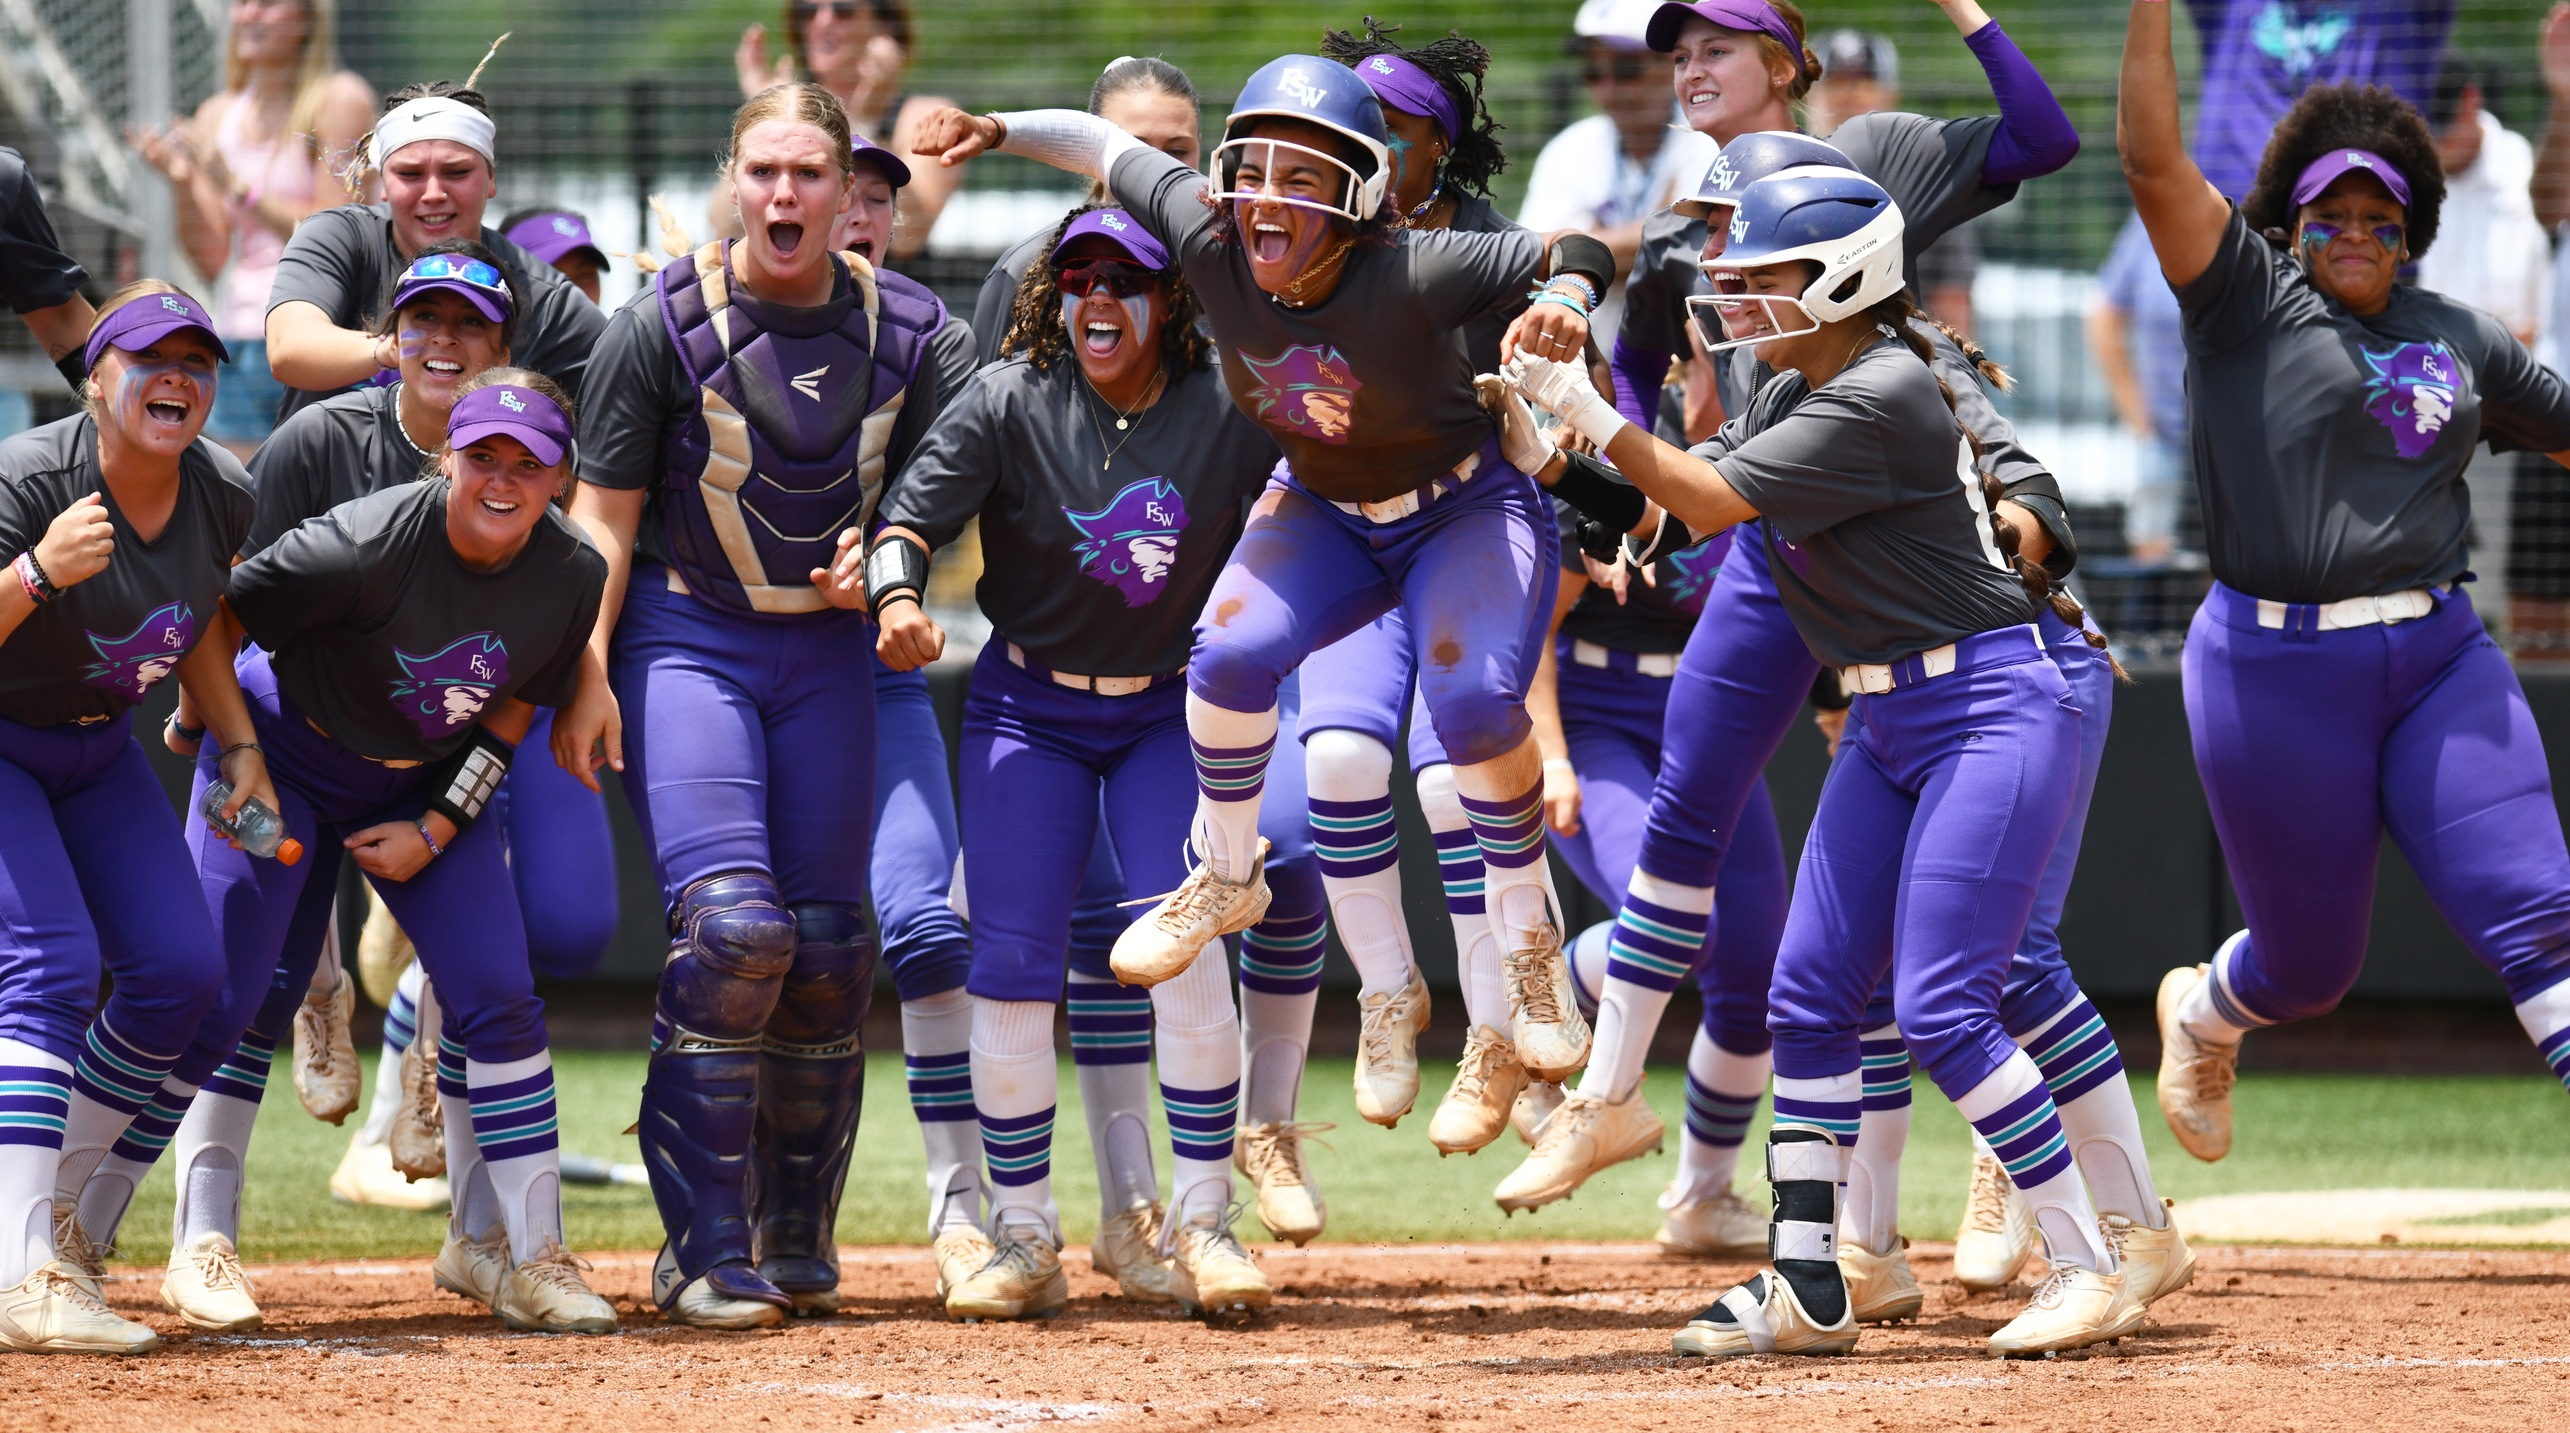 The Bucs Celebrate Feline Poot's 4th Inning Home Run (Photo by Roy Allen)